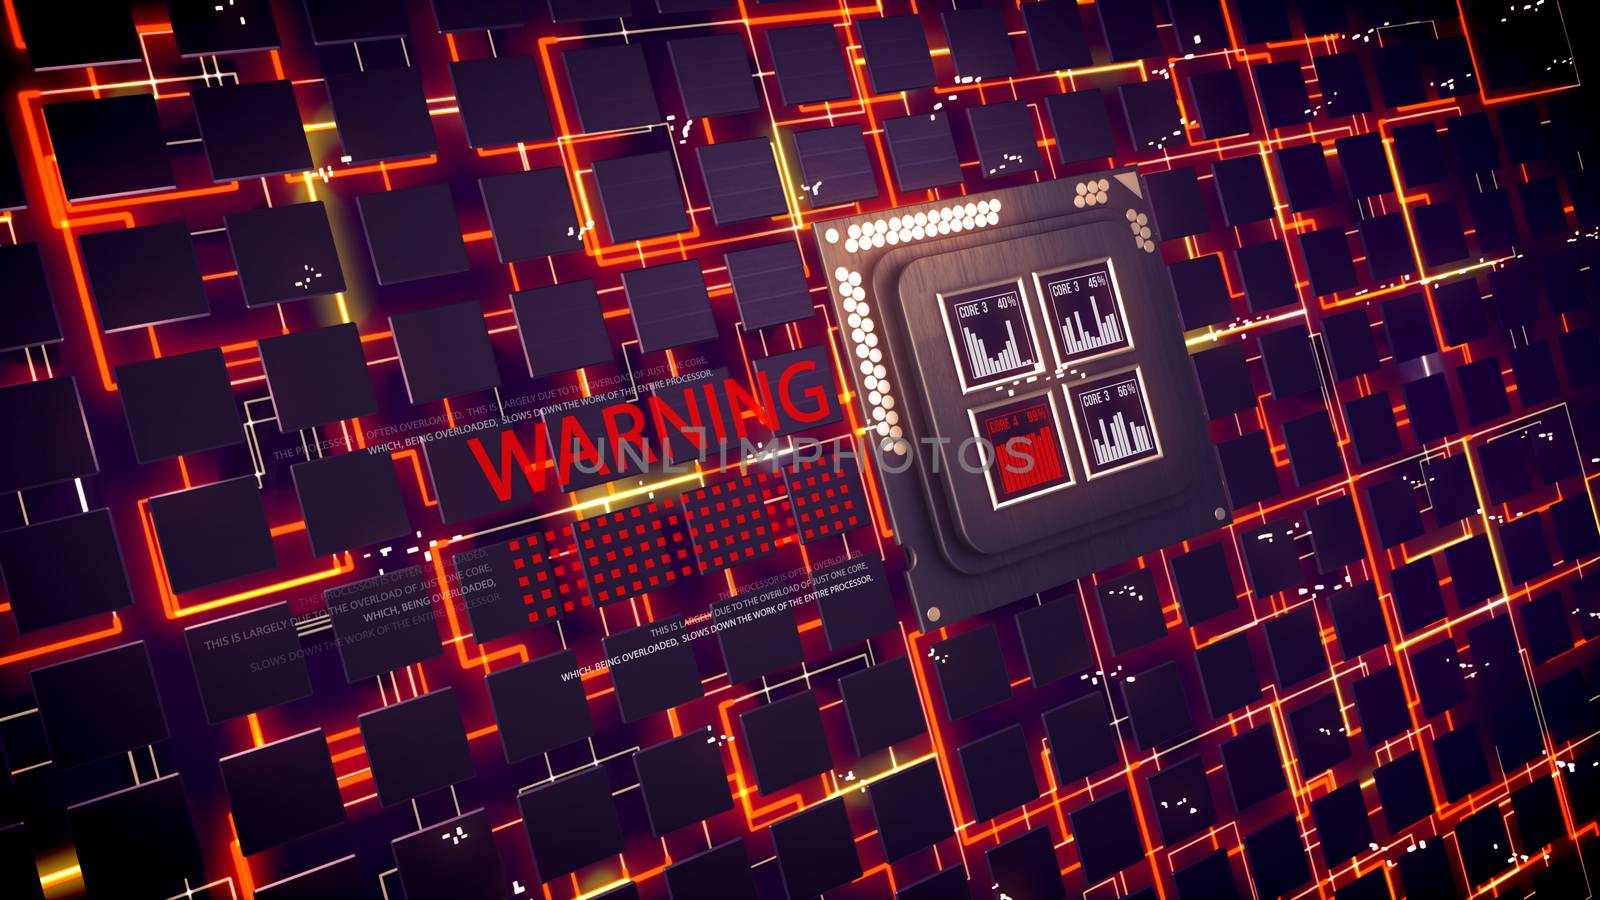 Futuristic 3d illustration of CPU squares with four bar charts inside. Many cubic devices are linked with orange linking lines as well as warning sign in the black backdrop.